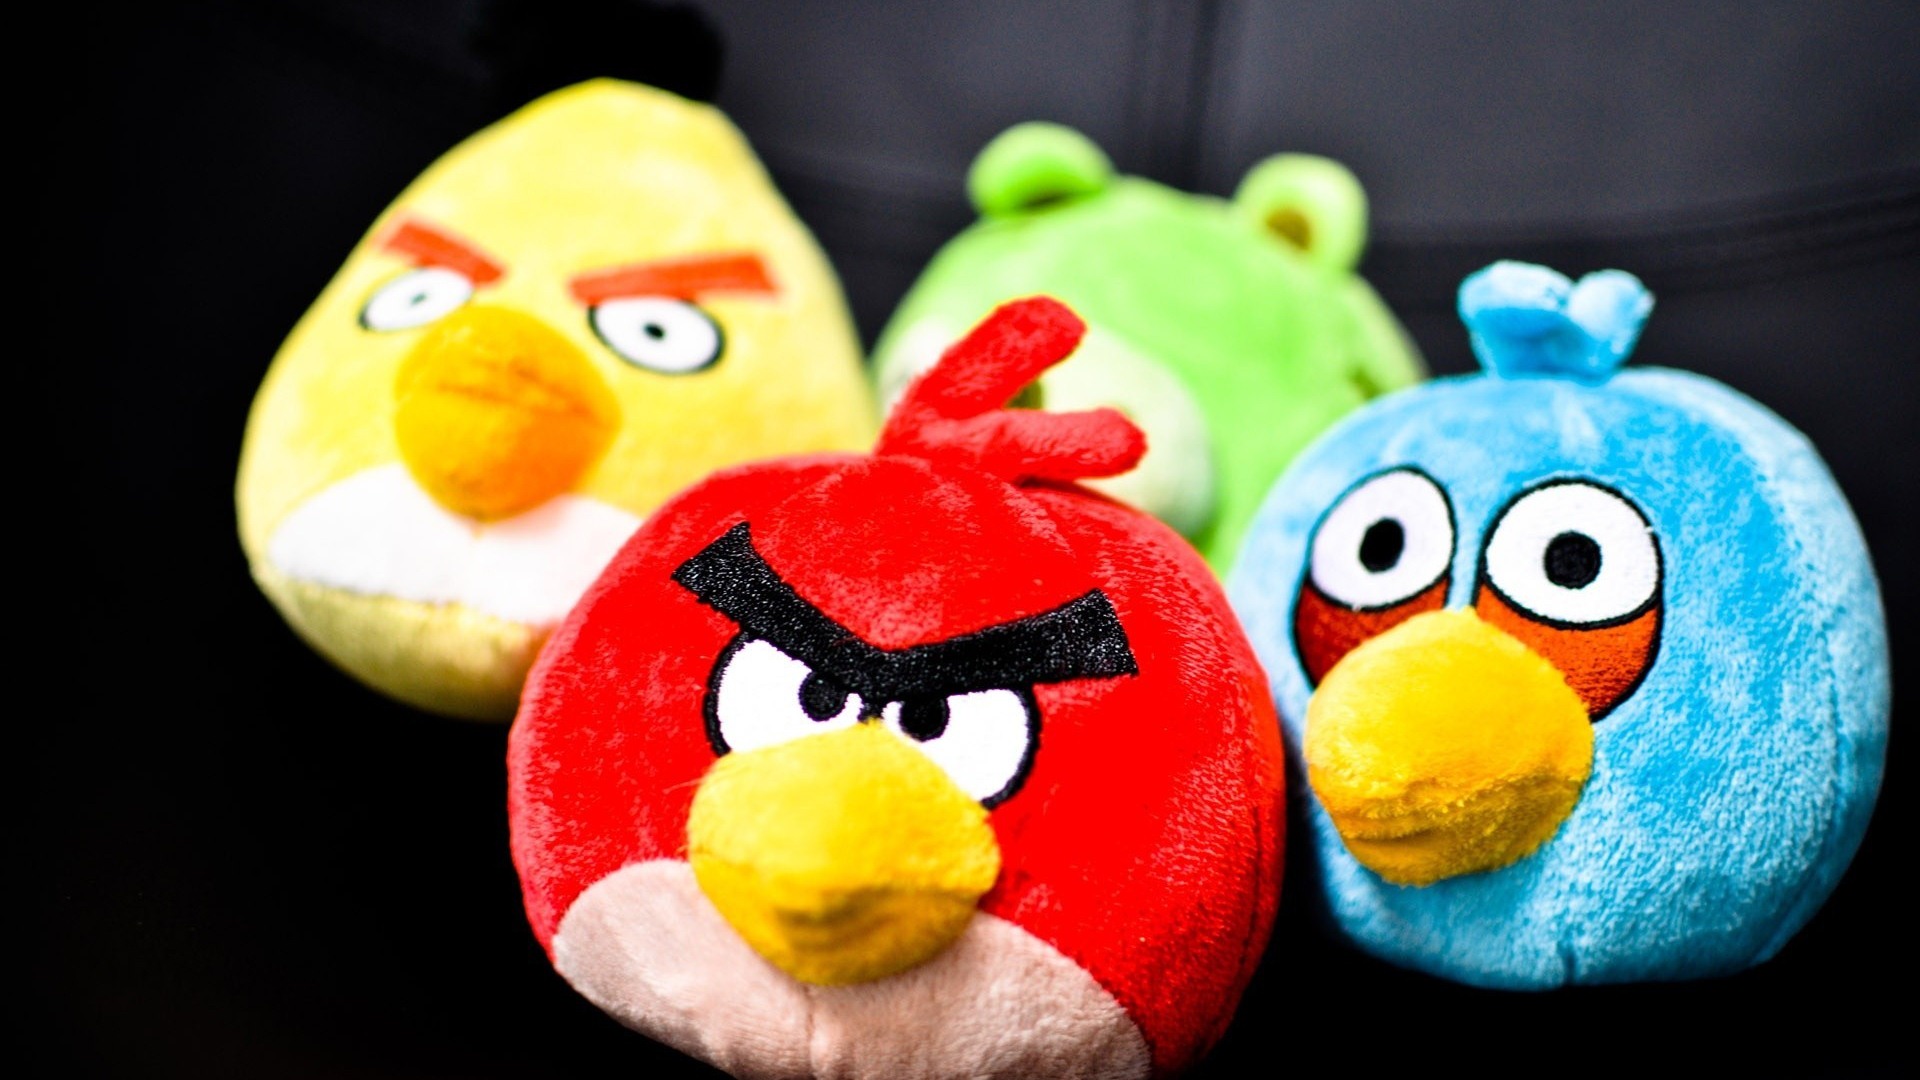 Angry Birds Game Wallpapers #16 - 1920x1080